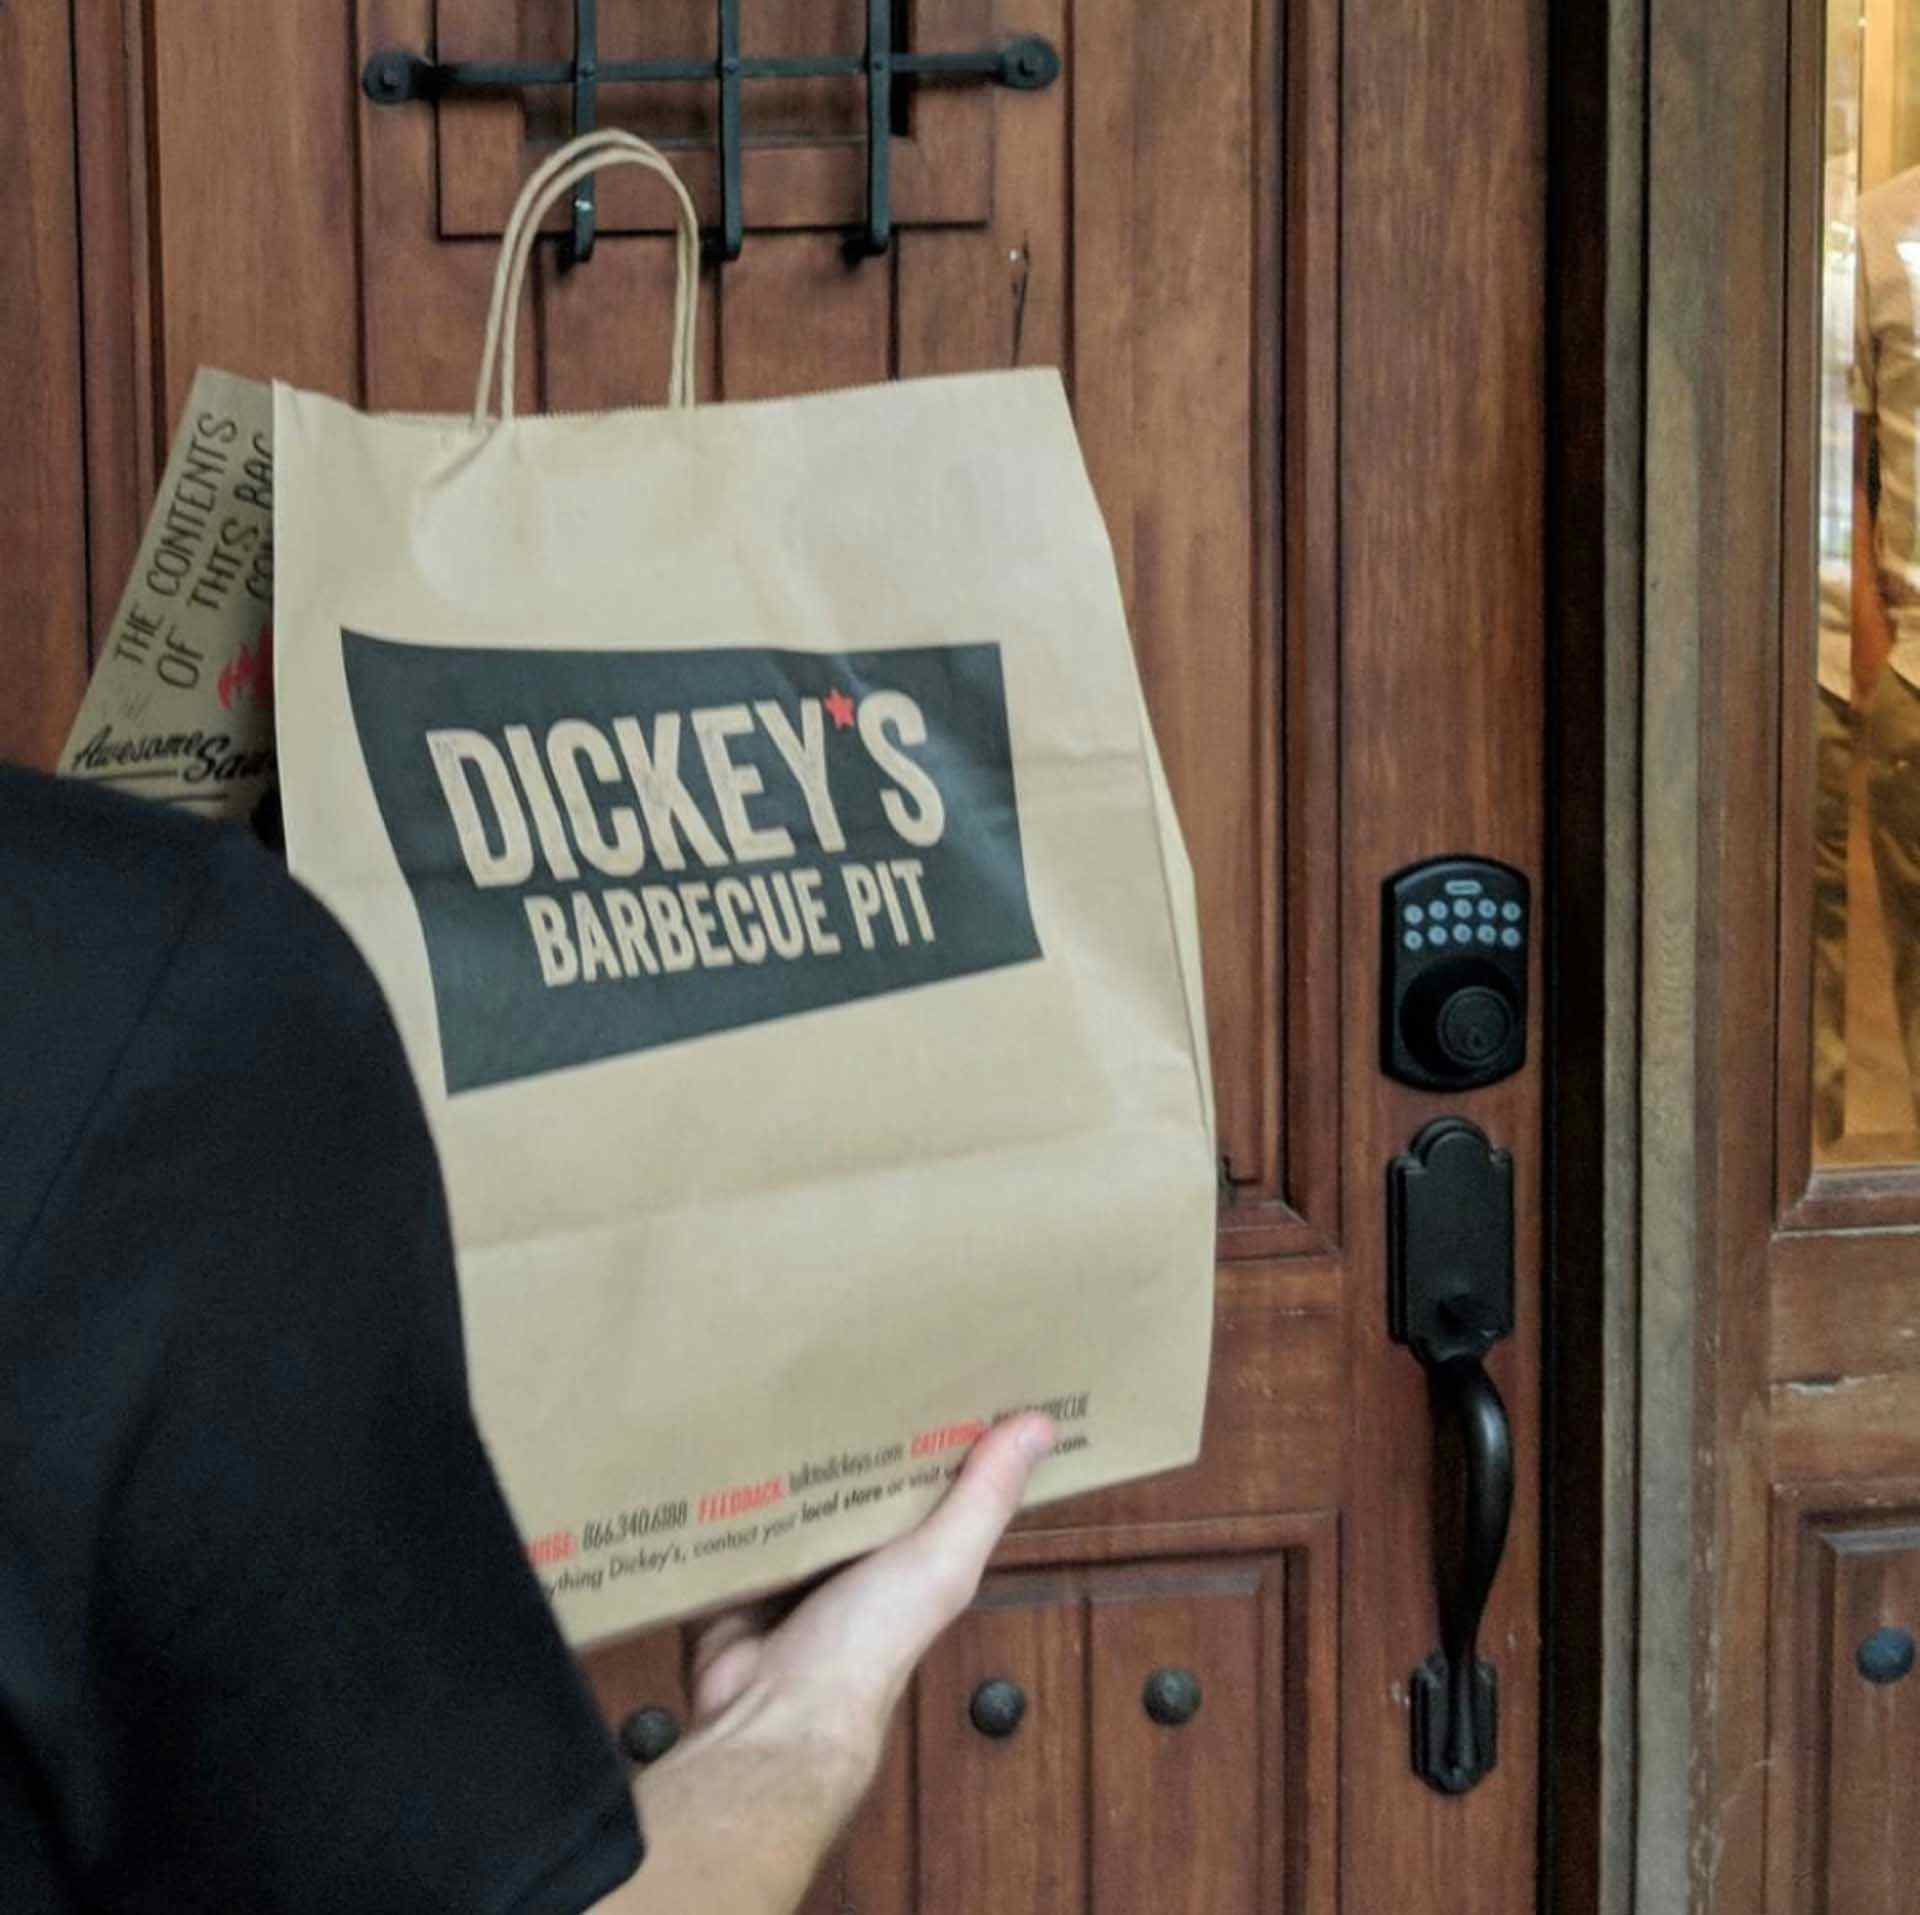 Restaurant News Release: Free Delivery Through March at Dickey’s Barbecue Pit